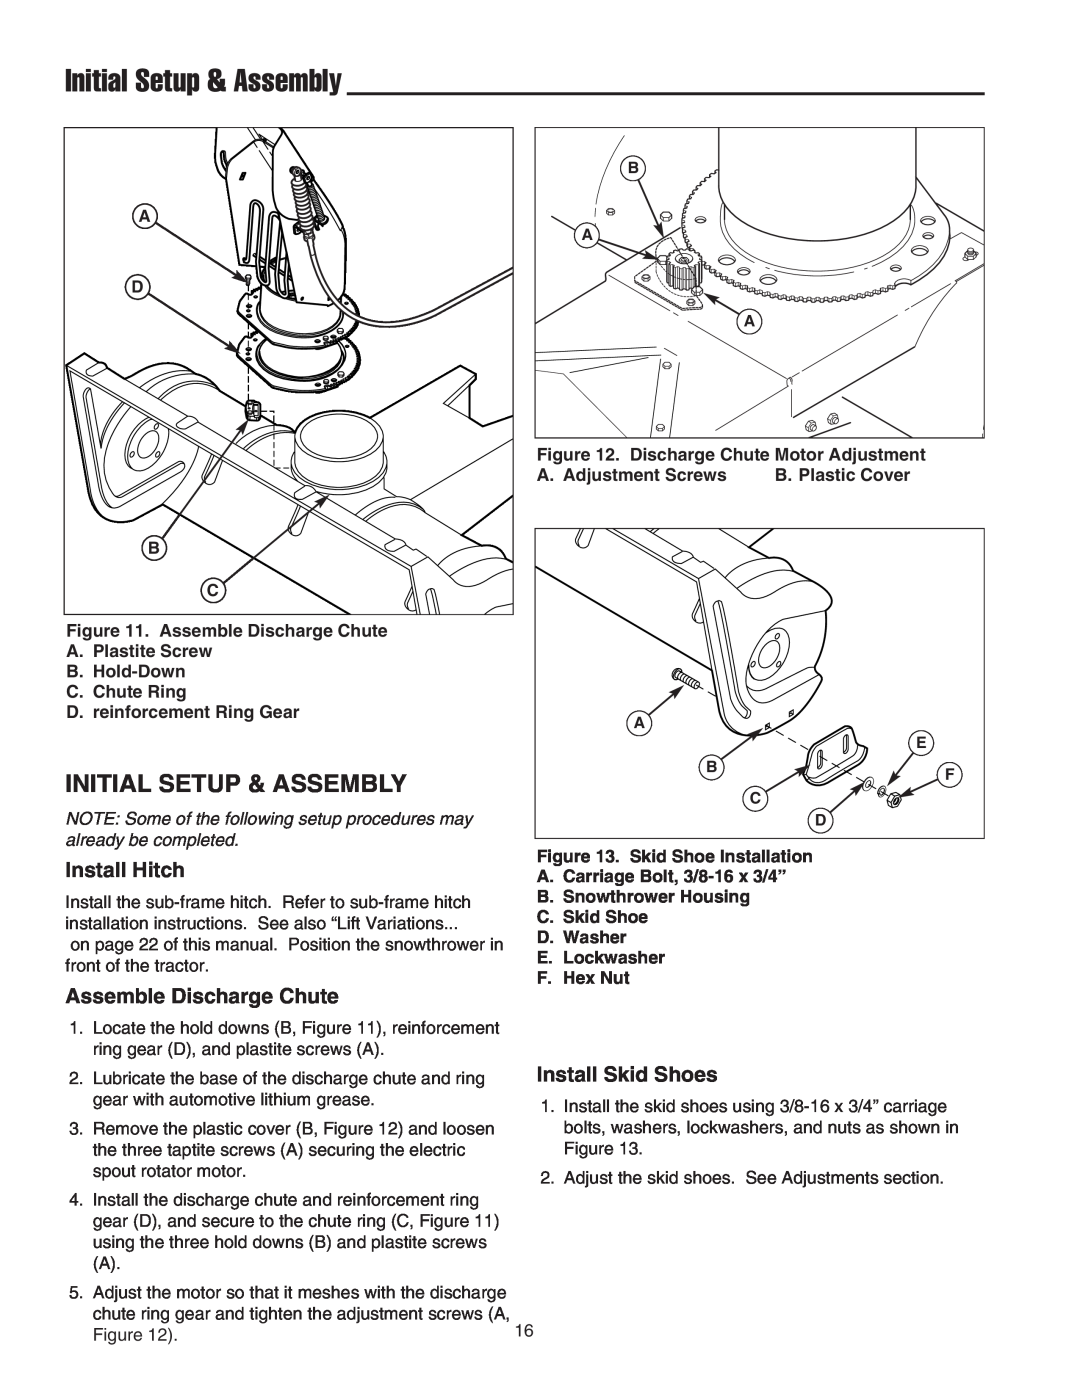 Snapper 1694144, 1694295, 1694150 Initial Setup & Assembly, Install Hitch, Assemble Discharge Chute, Install Skid Shoes 